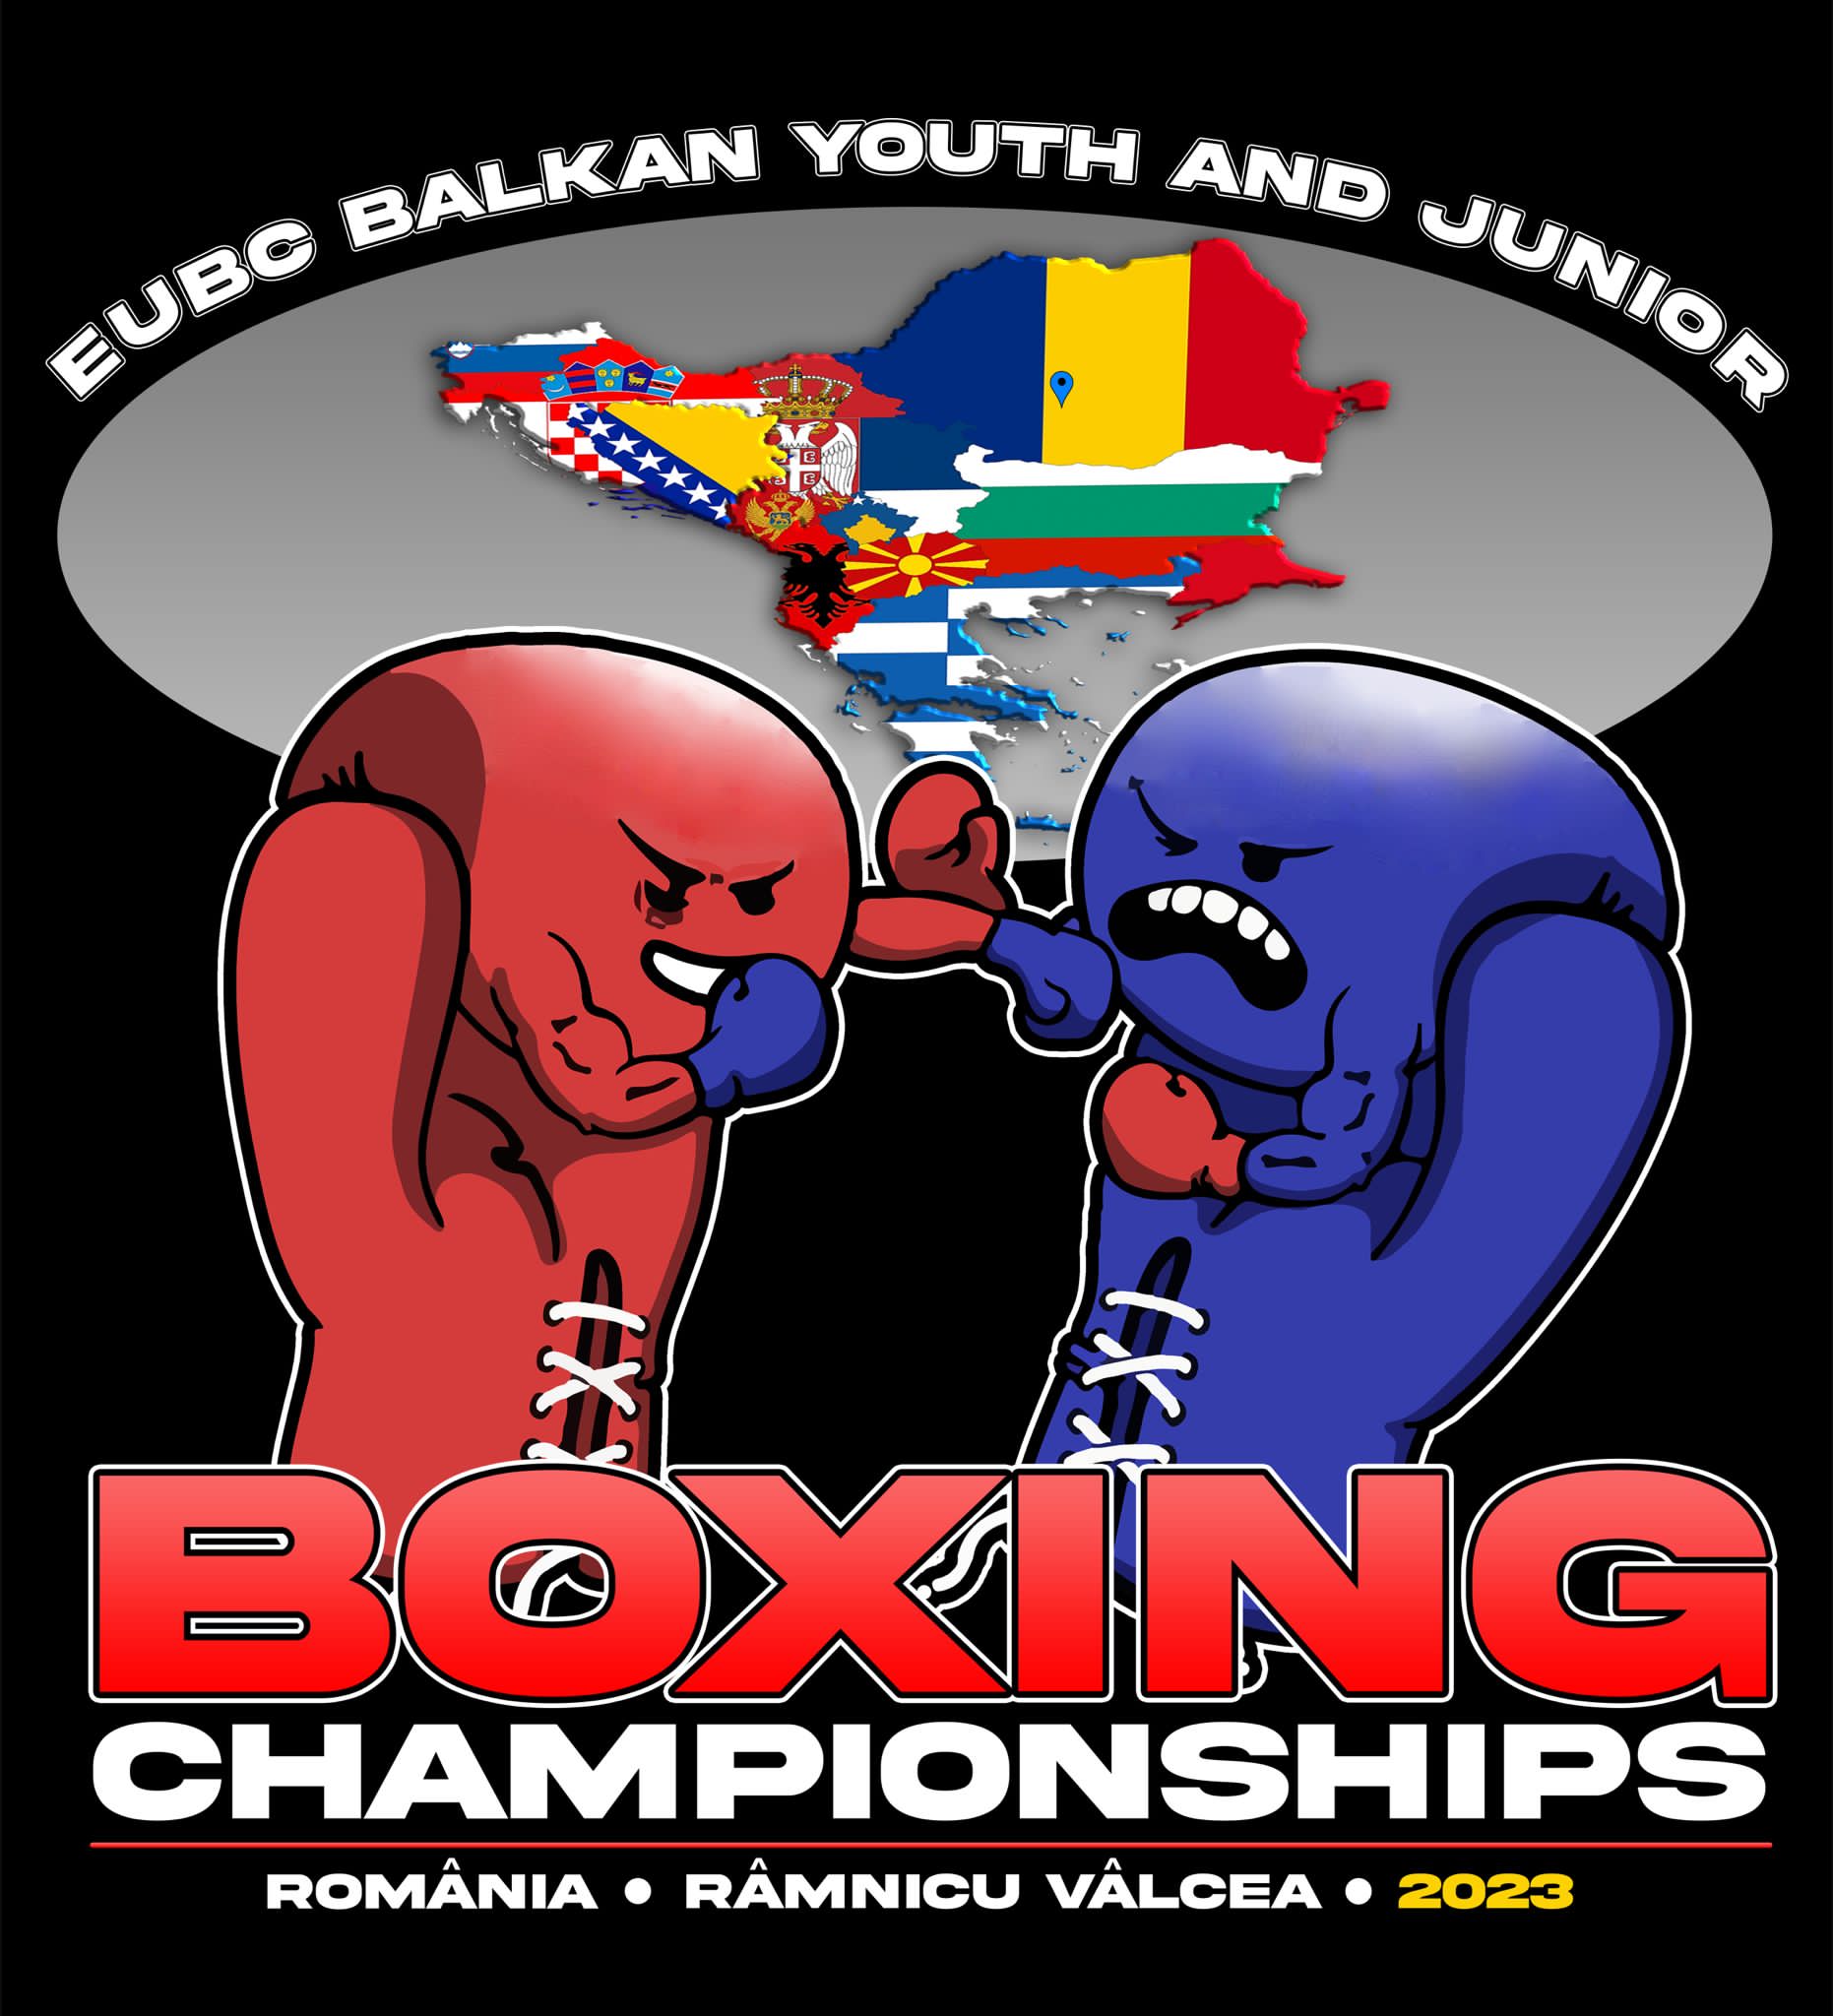 The stage is set for the EUBC Balkan Youth and Junior Championships